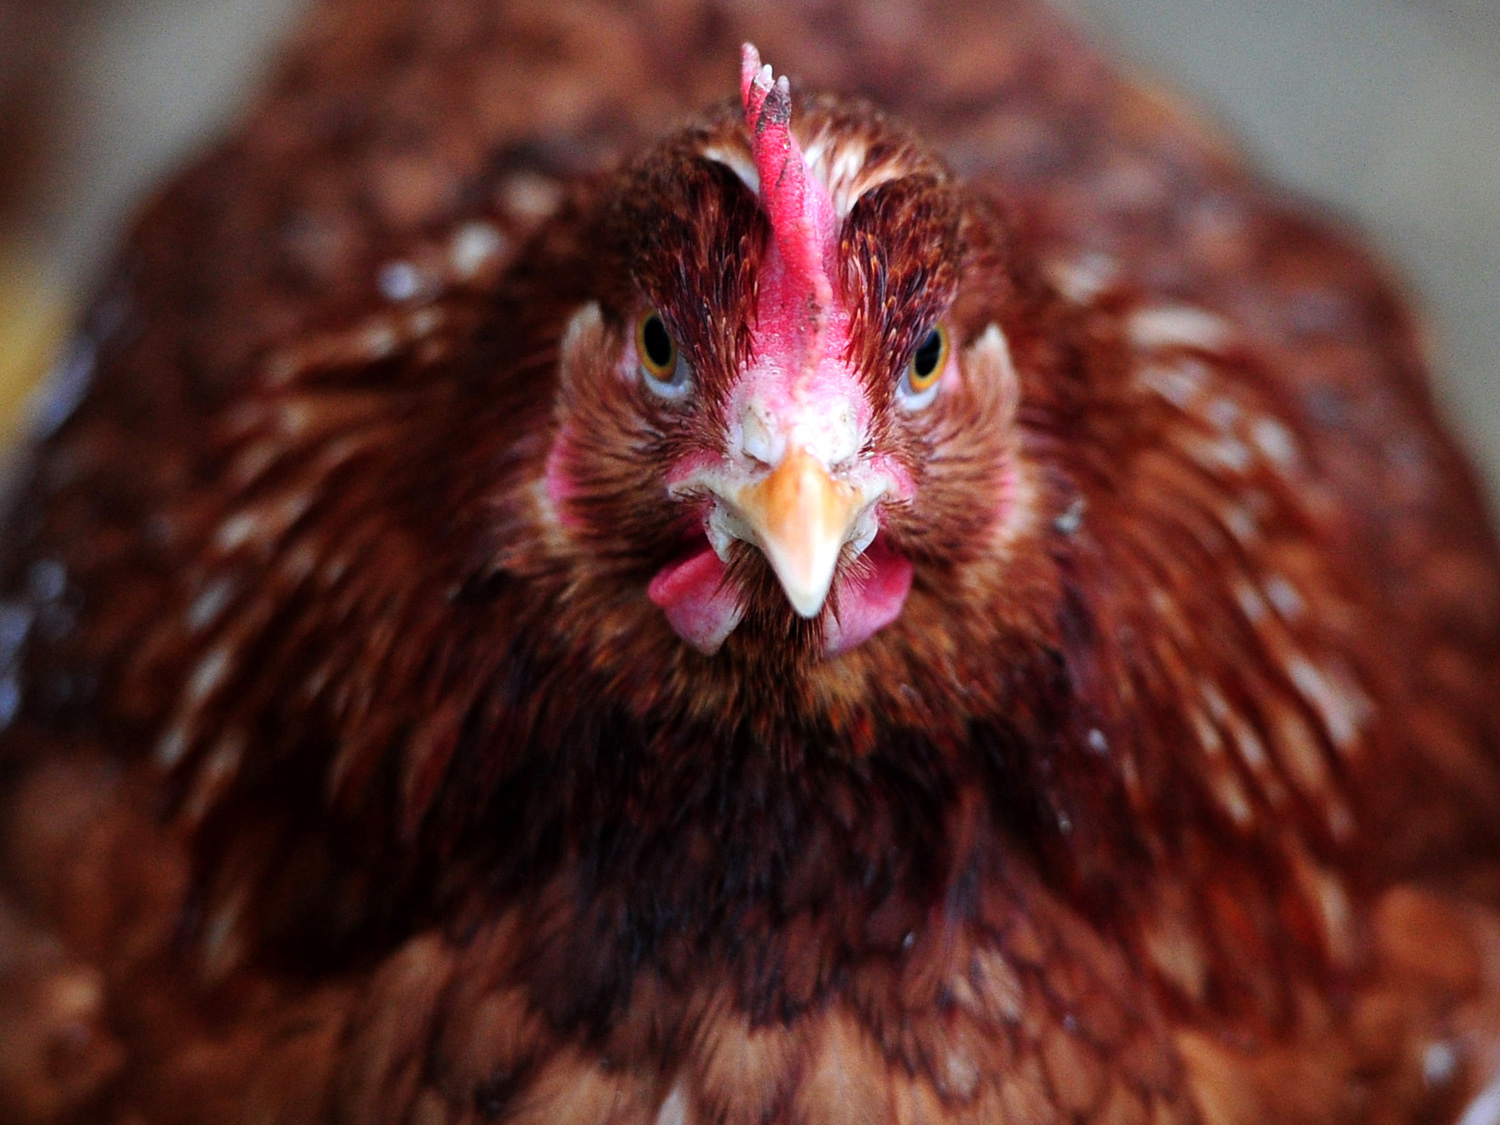 Study Hens can reject sperm from randy roosters